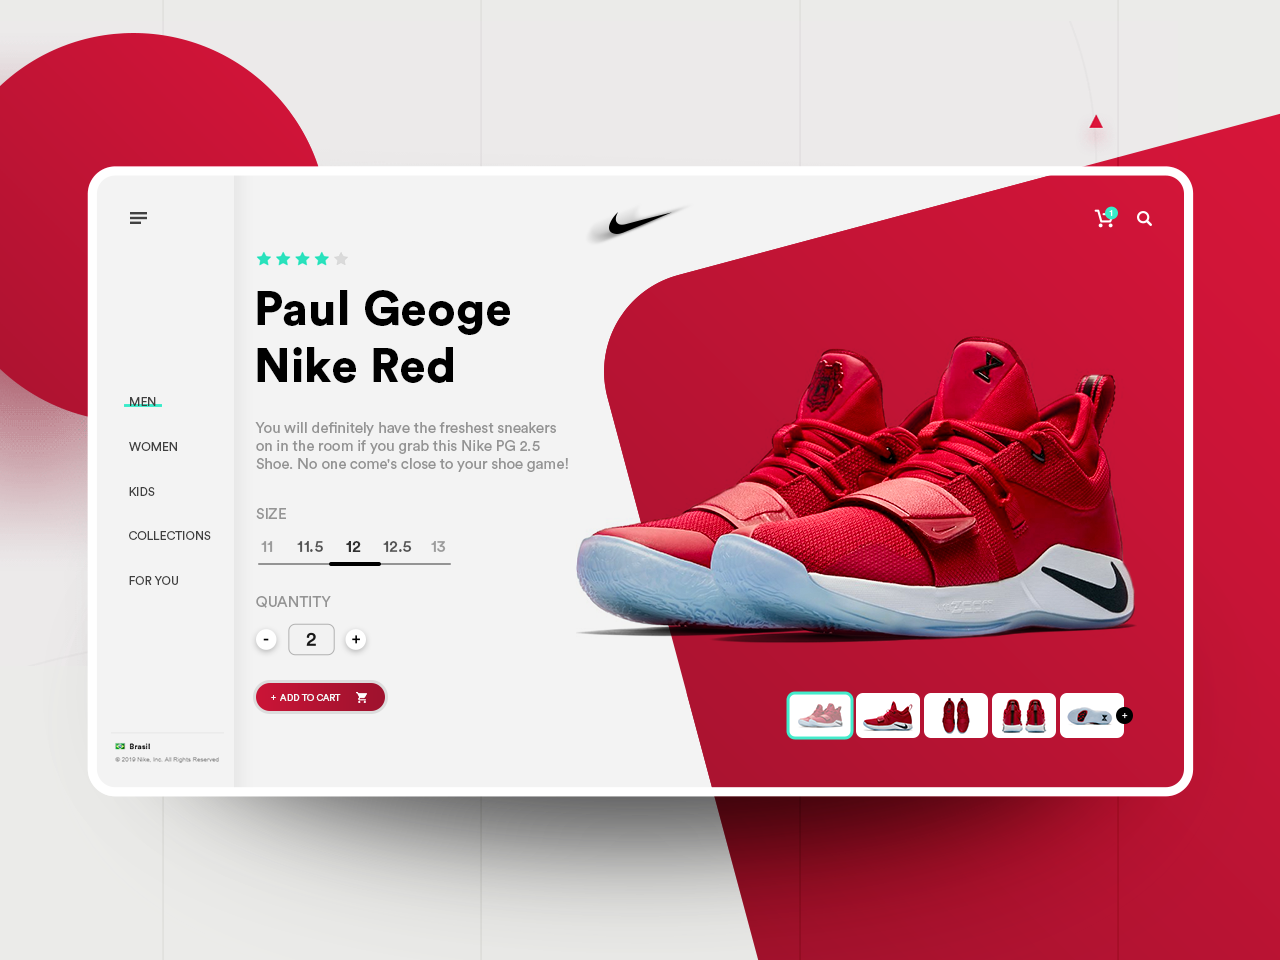 Nike - Product Page by Lucas Dantas on Dribbble